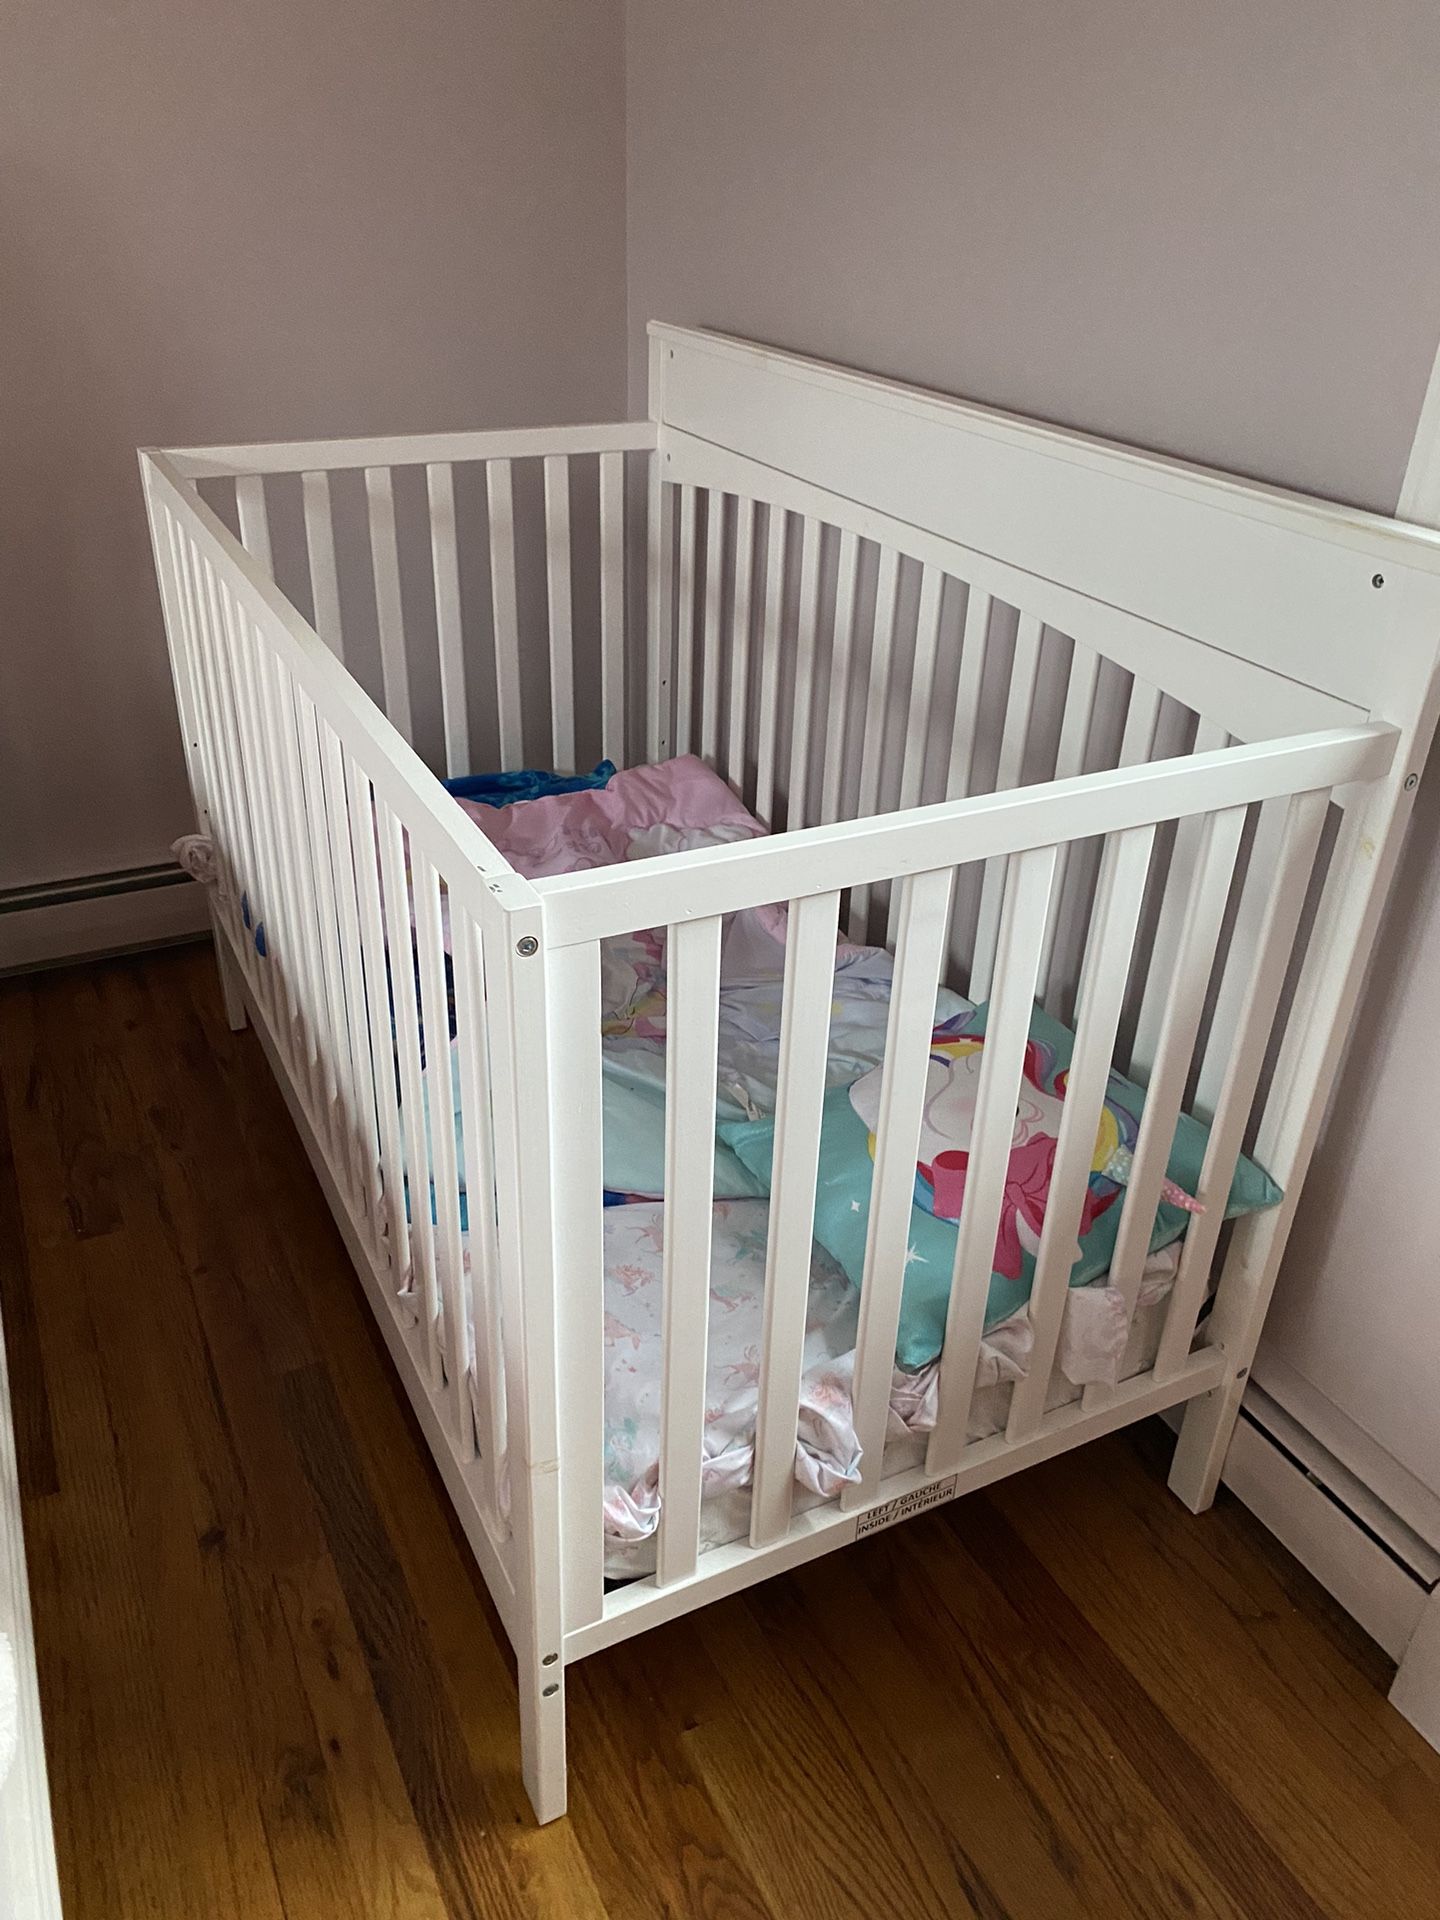 Crib With Mattress Used About 3-4 Times 